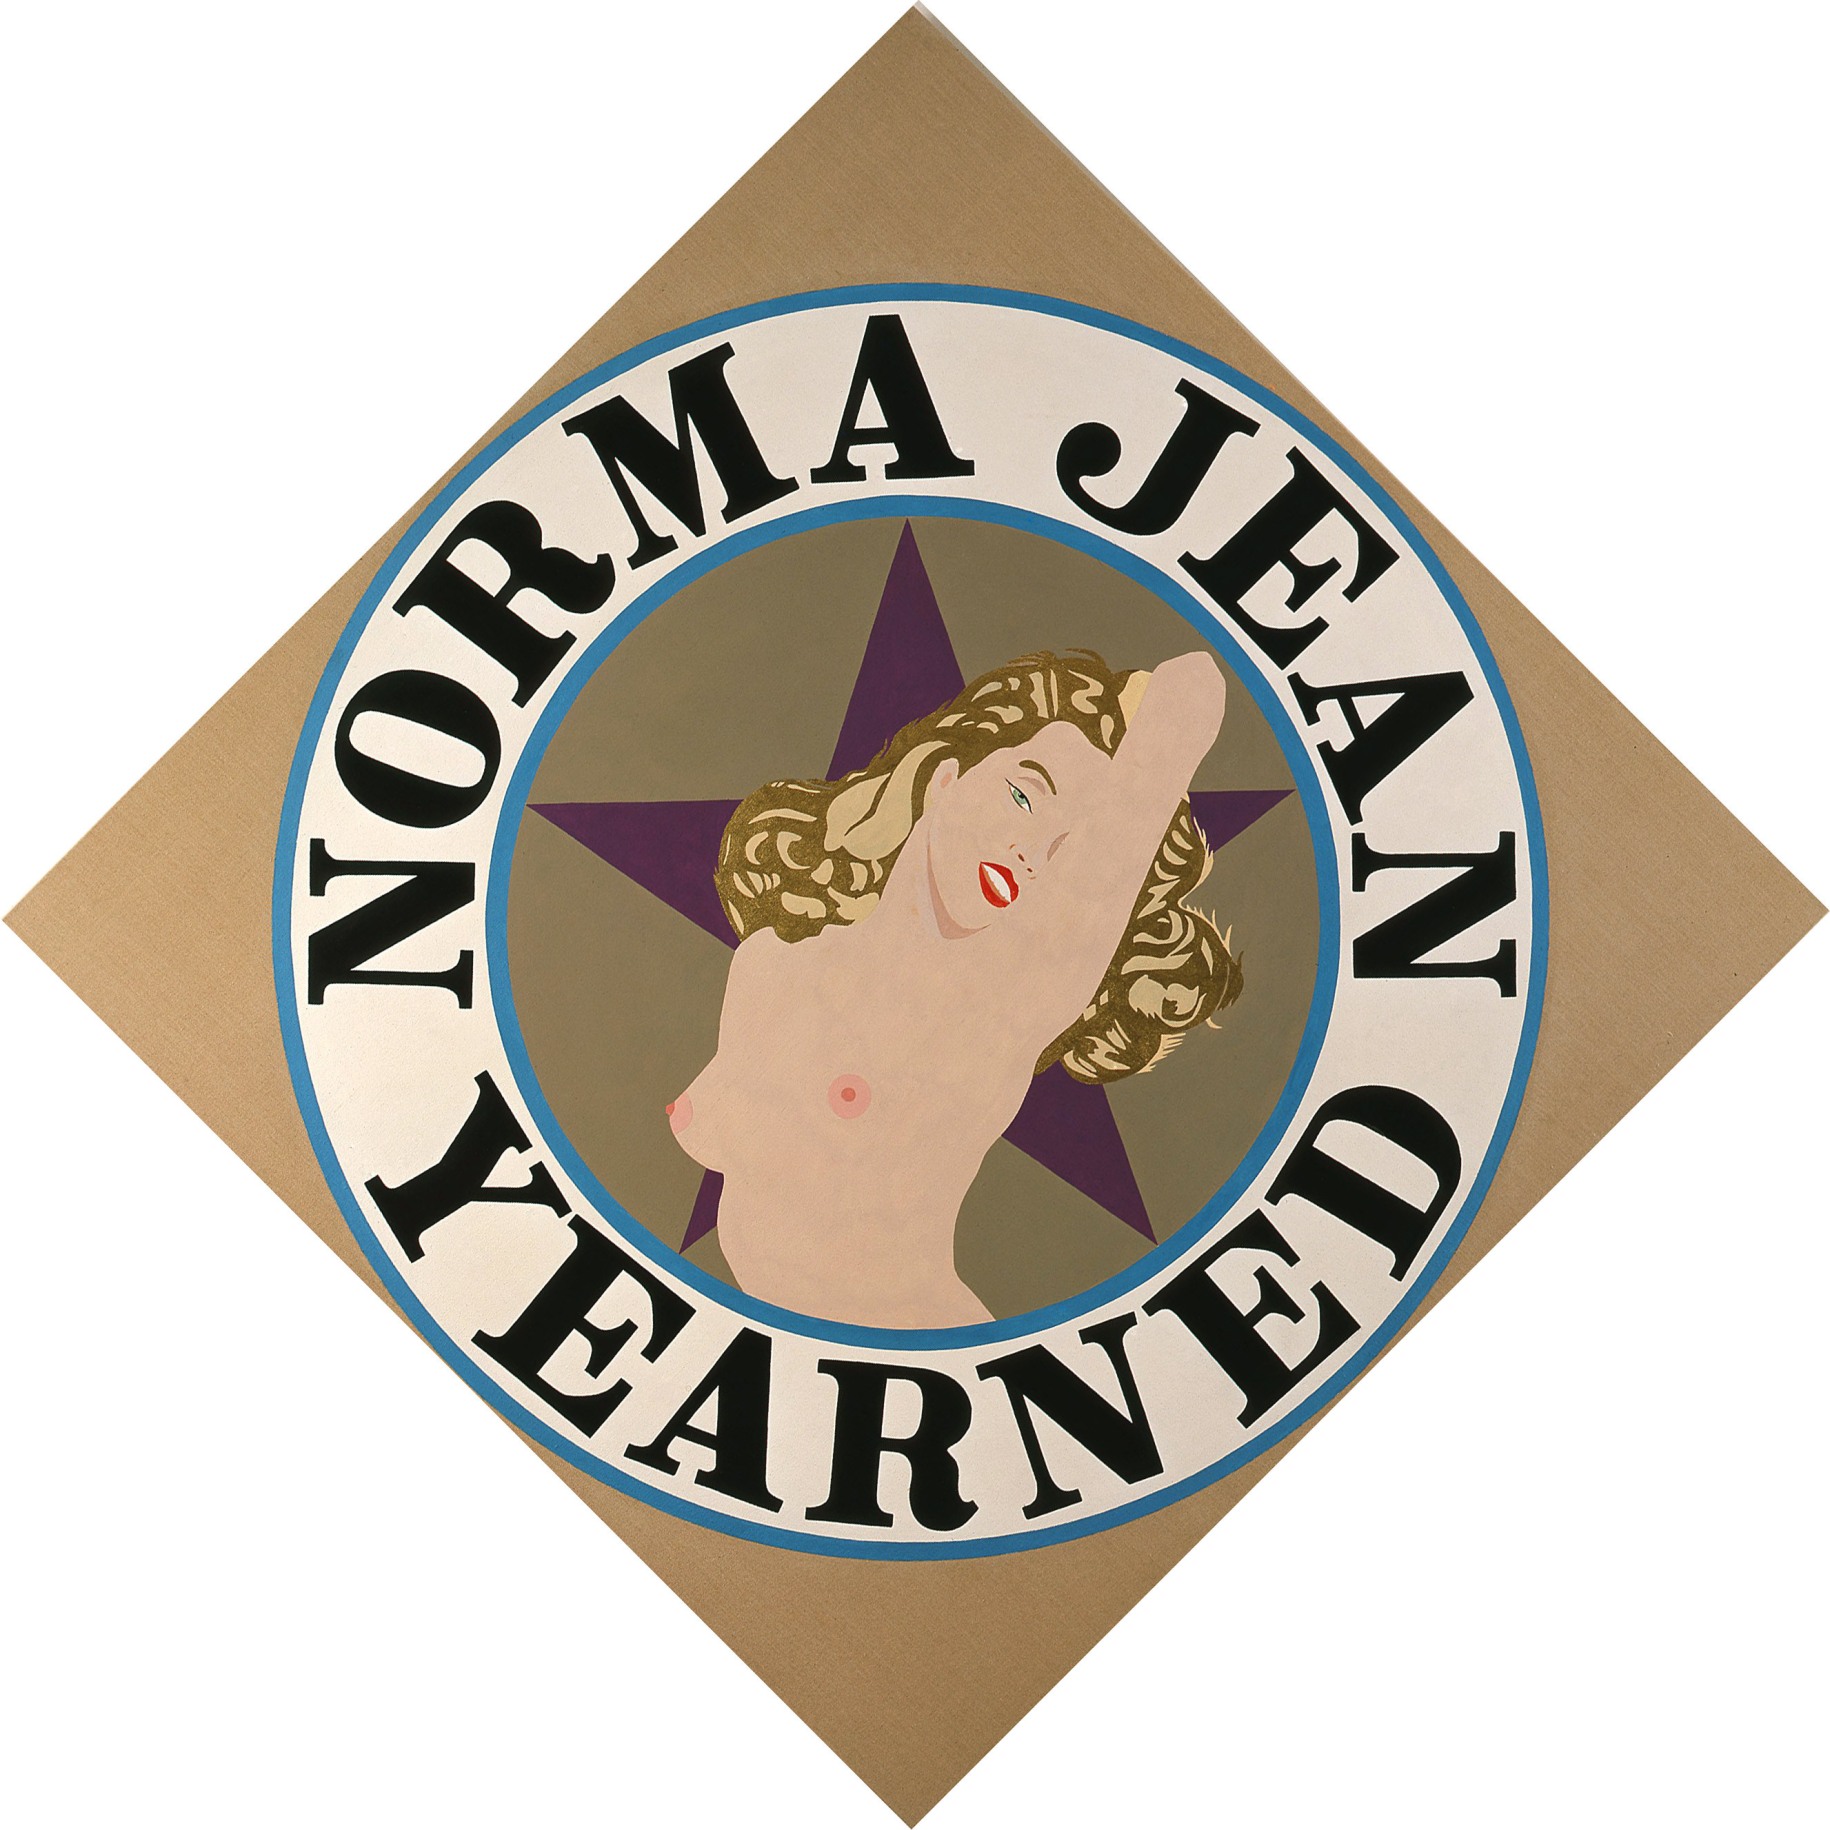 A 68 by 68 inch diamond shaped canvas with a light brown ground. In the center is a topless image of Monroe against a purple star in a light brown circle. Surrounding the circle is a white ring with a blue outlines, containing the painting's title, &quot;Norma Jean Yearned&quot; painted in black.